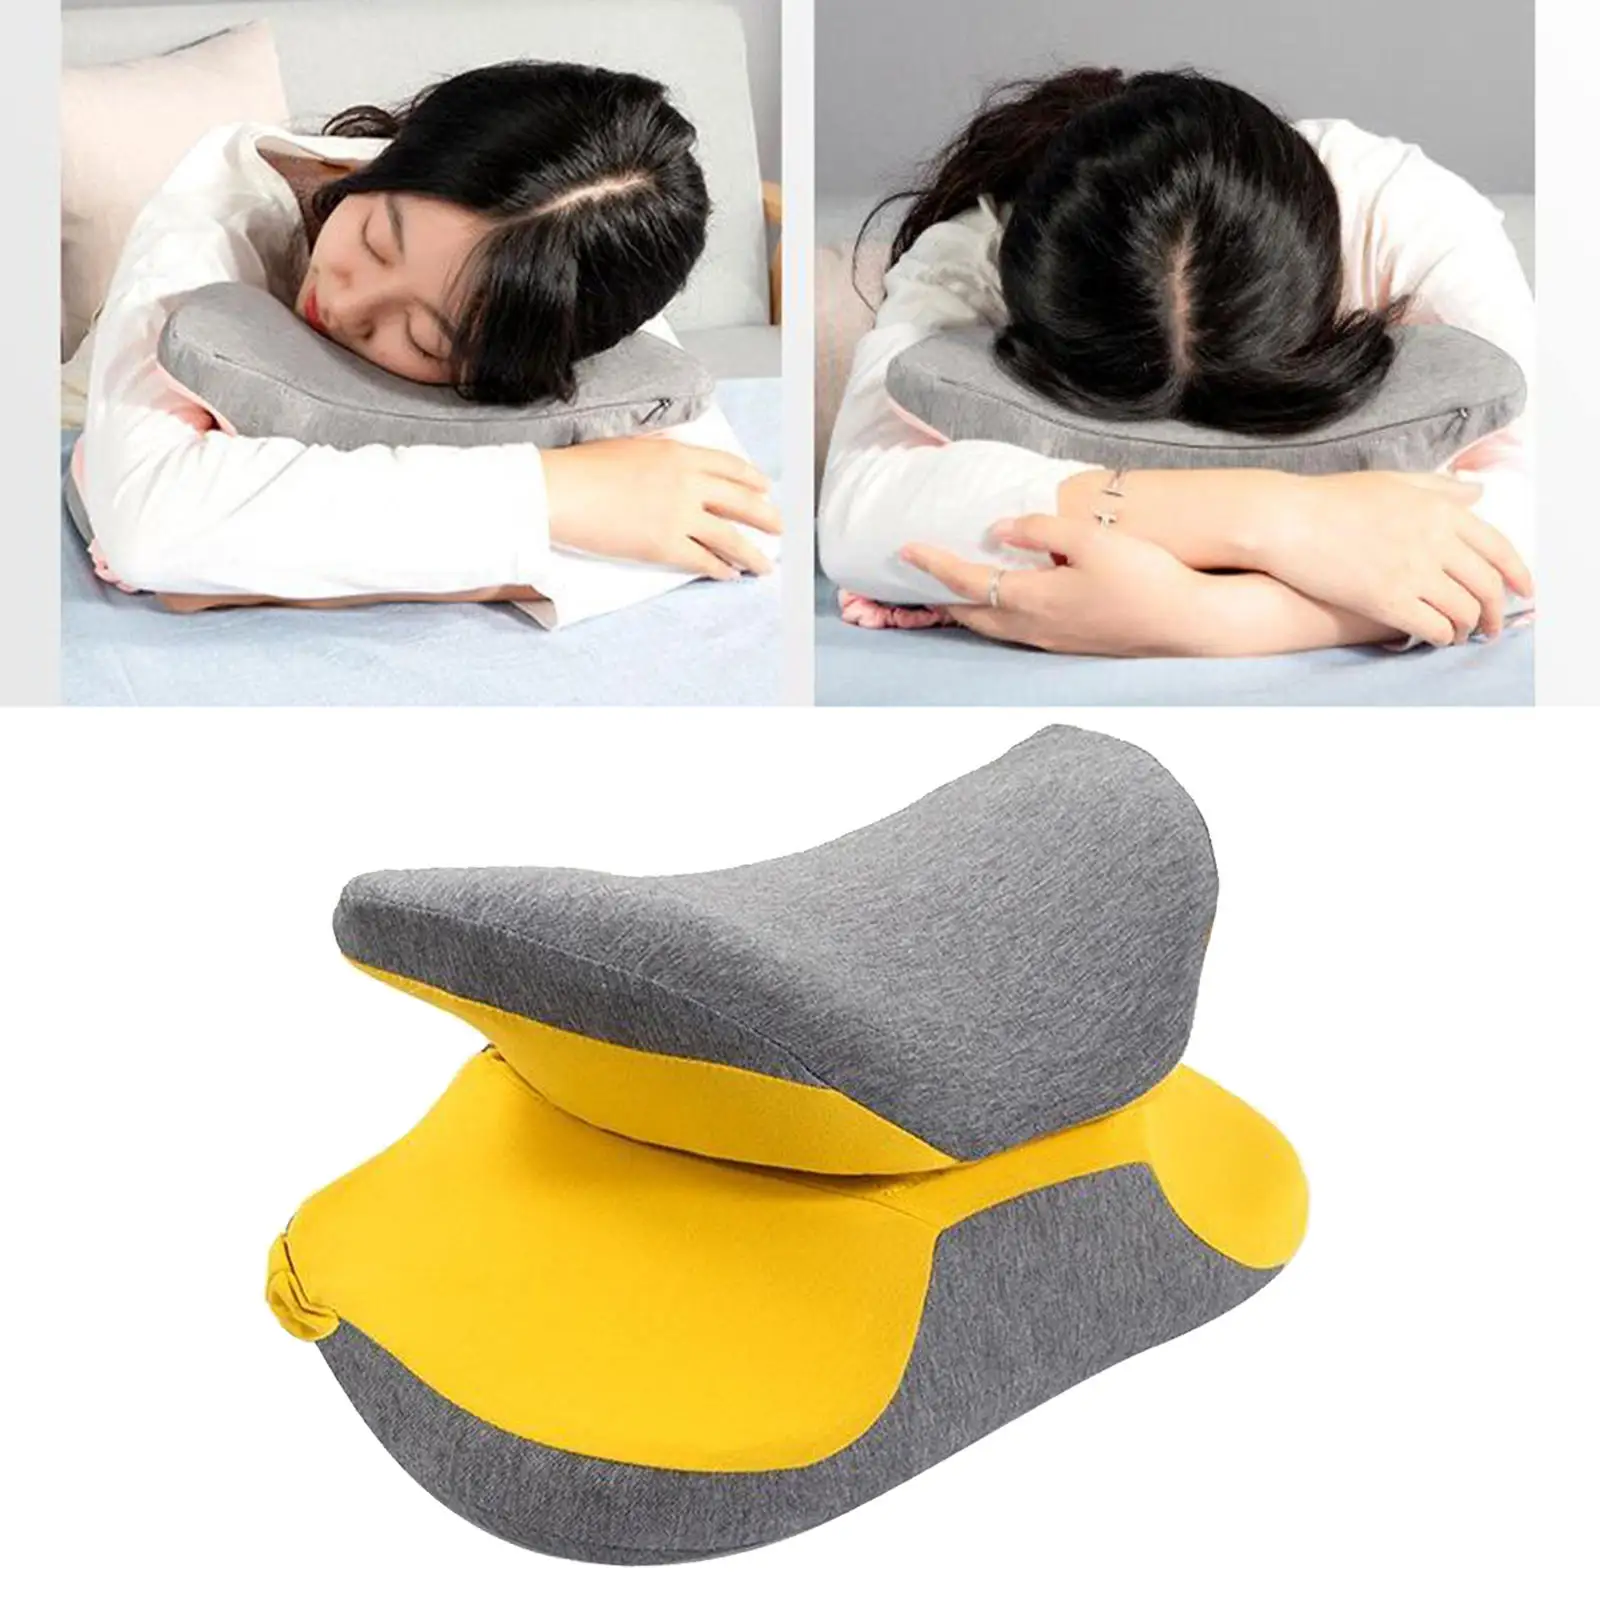 Cervical Neck and Shoulder Relaxing Pillow Memory Sponge Head Tension Release Pillow Travel Pillow on Train Airplane Car Office Rest Driving Sleeping 